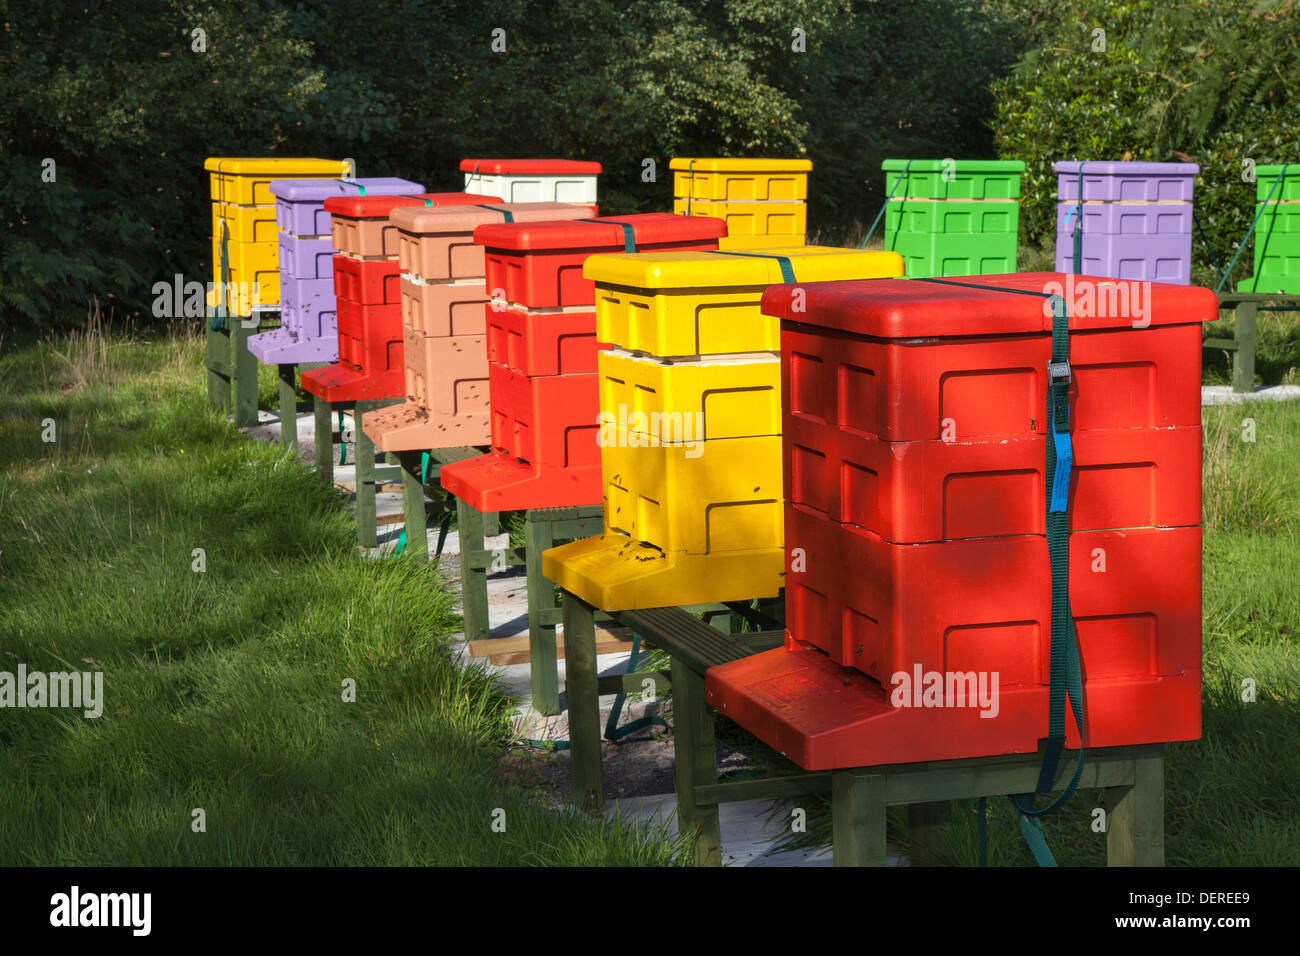 Colourful beehives Langstroth sizes arranged in L shape.  Beekeeping yard & National poly hive  Polystyrene Apiaries hives, Liverpool, Merseyside, UK Stock Photo